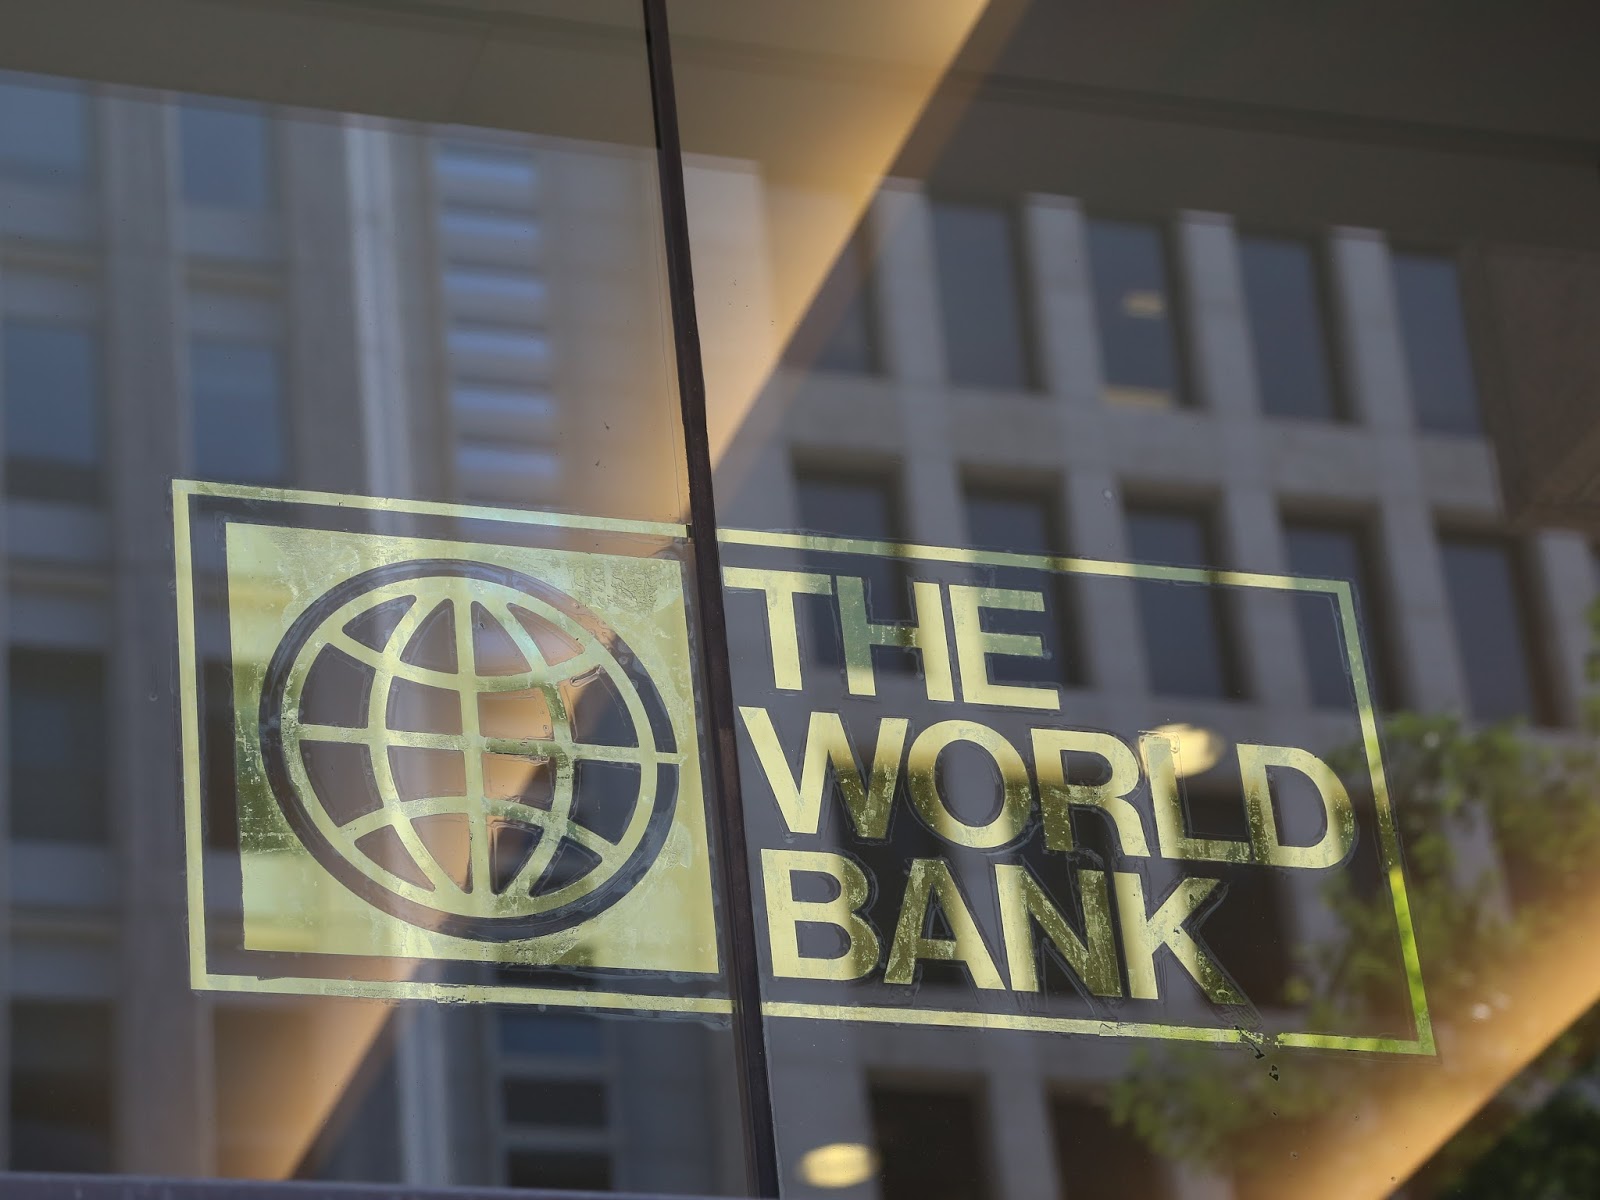 From Groningen to the World Bank